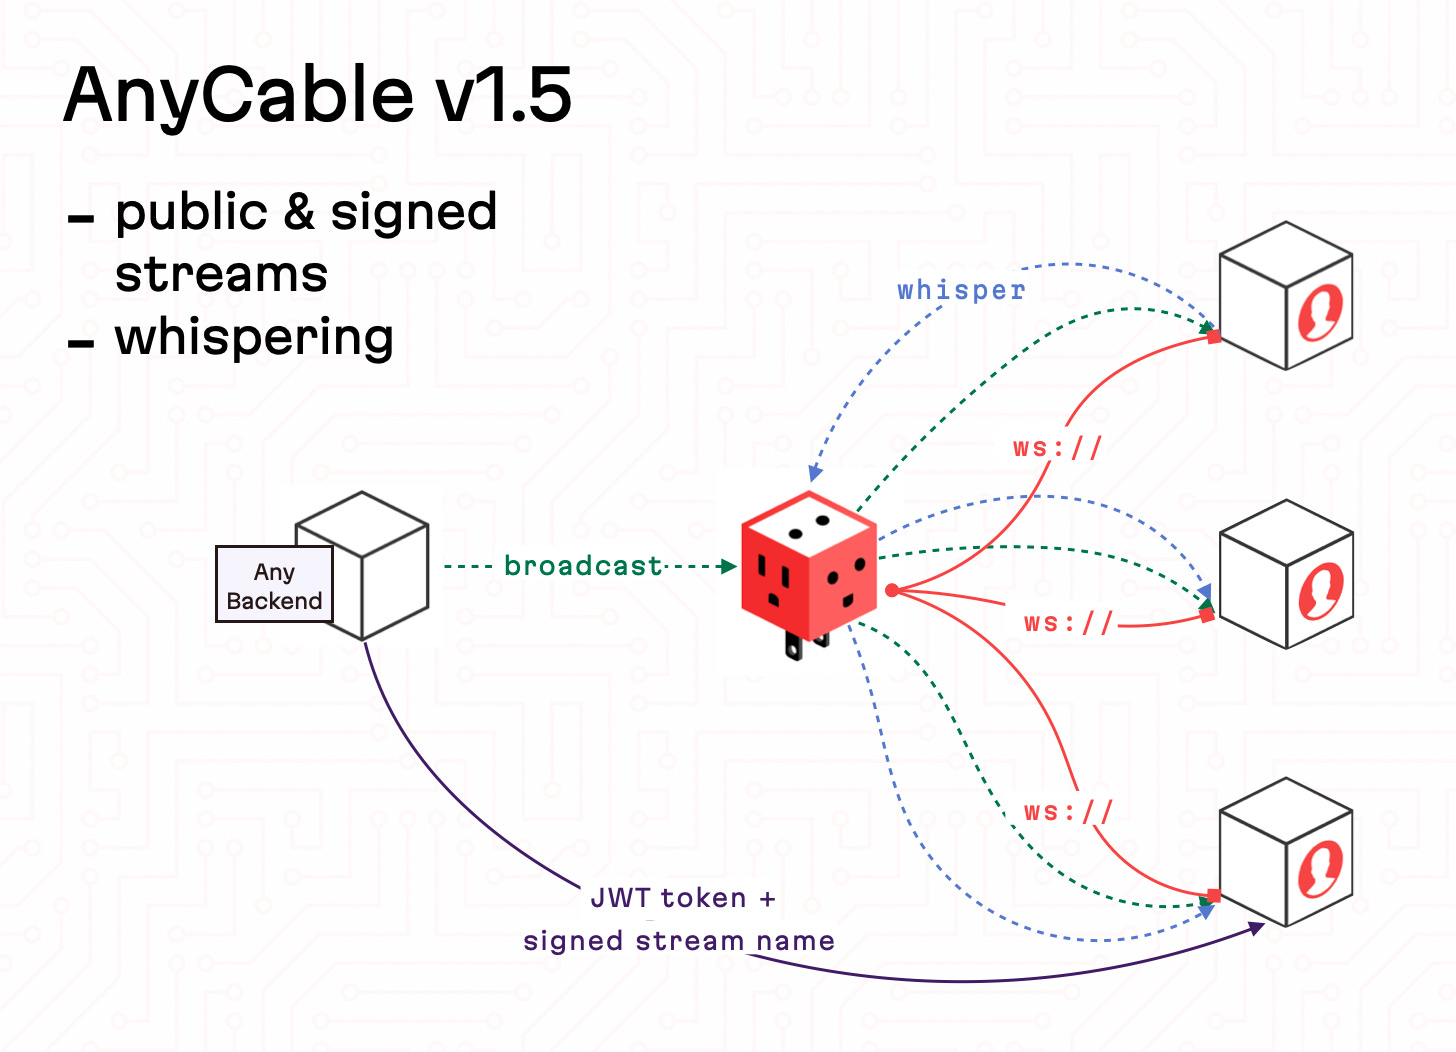 AnyCable v1.5 communication diagram with signed streams and whispering